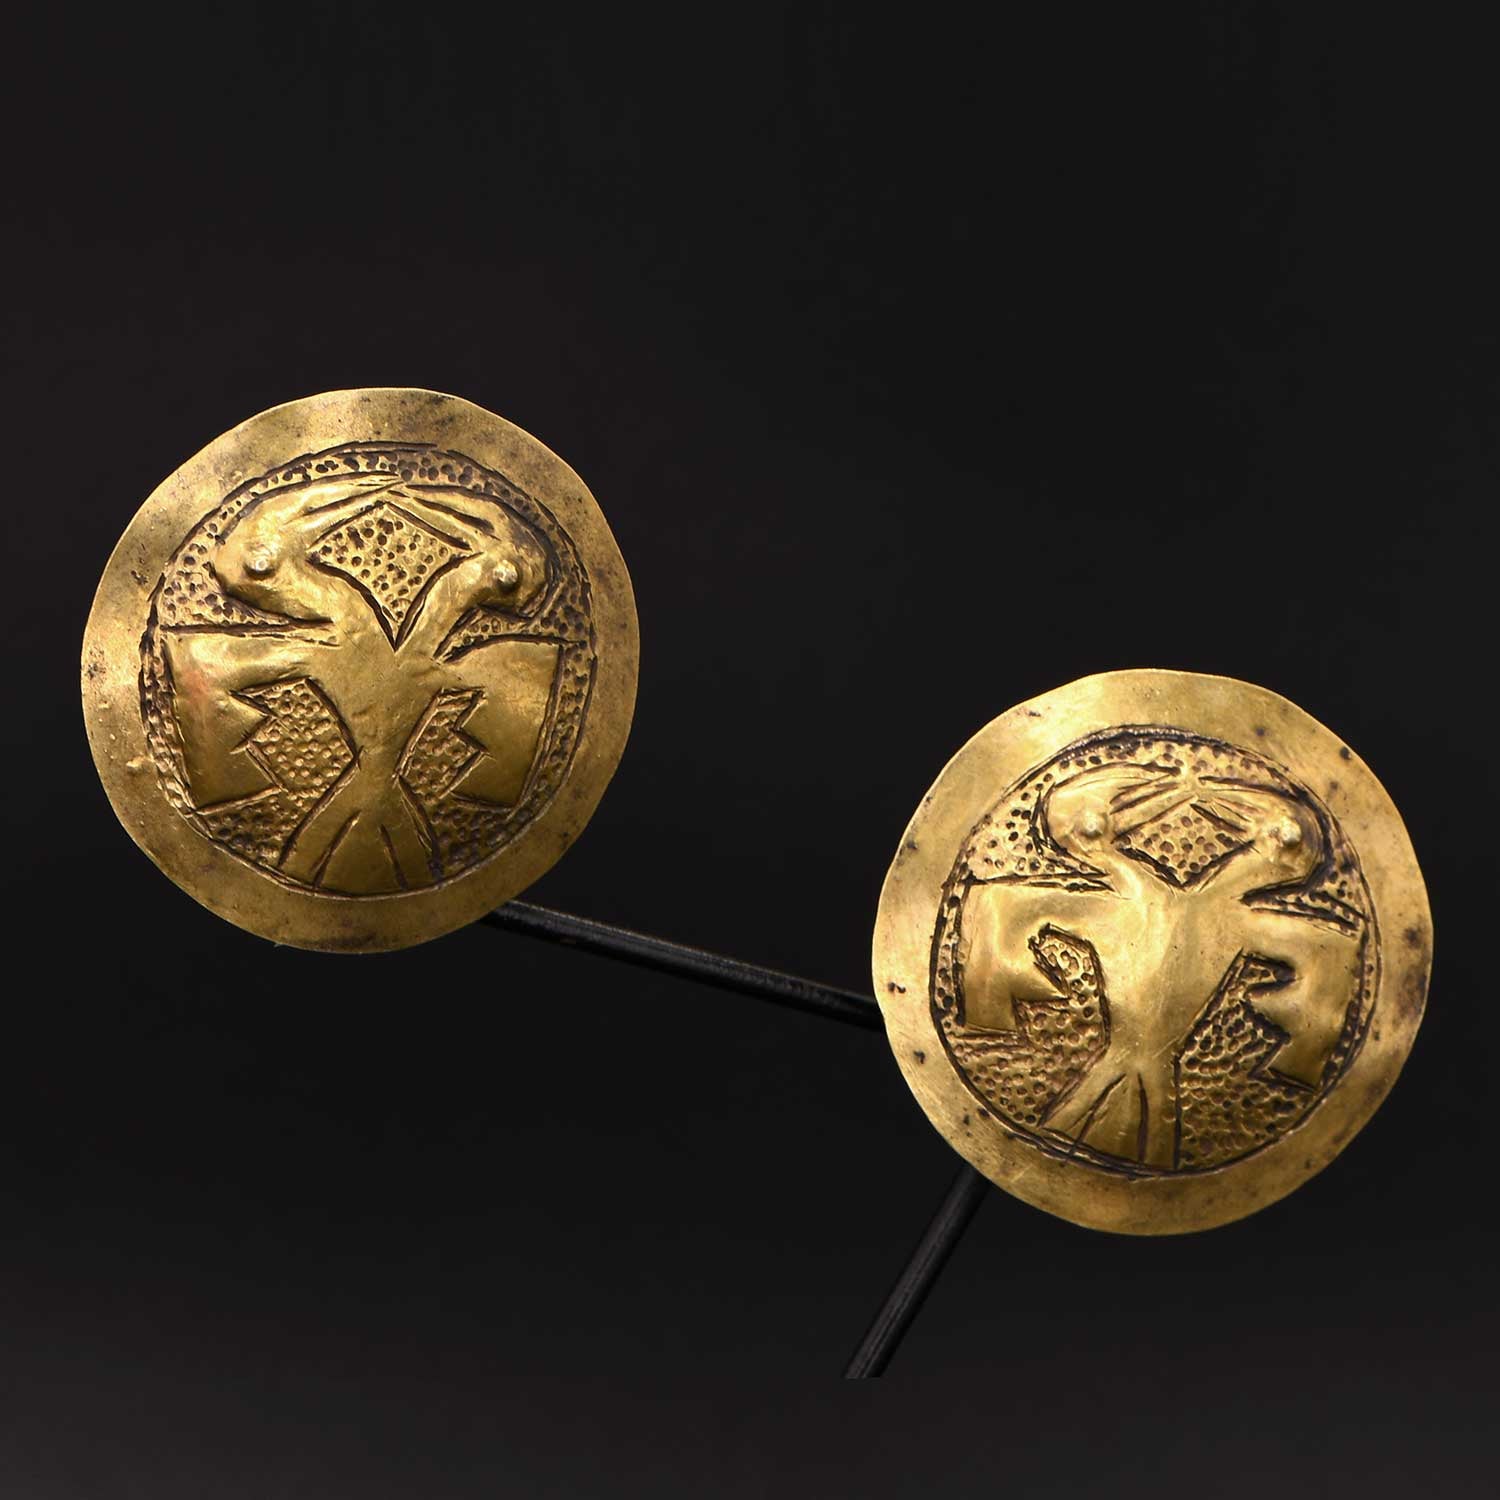 A pair of Nazca Gold & Silver Rattle Ear Spools, Early Intermediate Period, ca. 200 - 400 CE